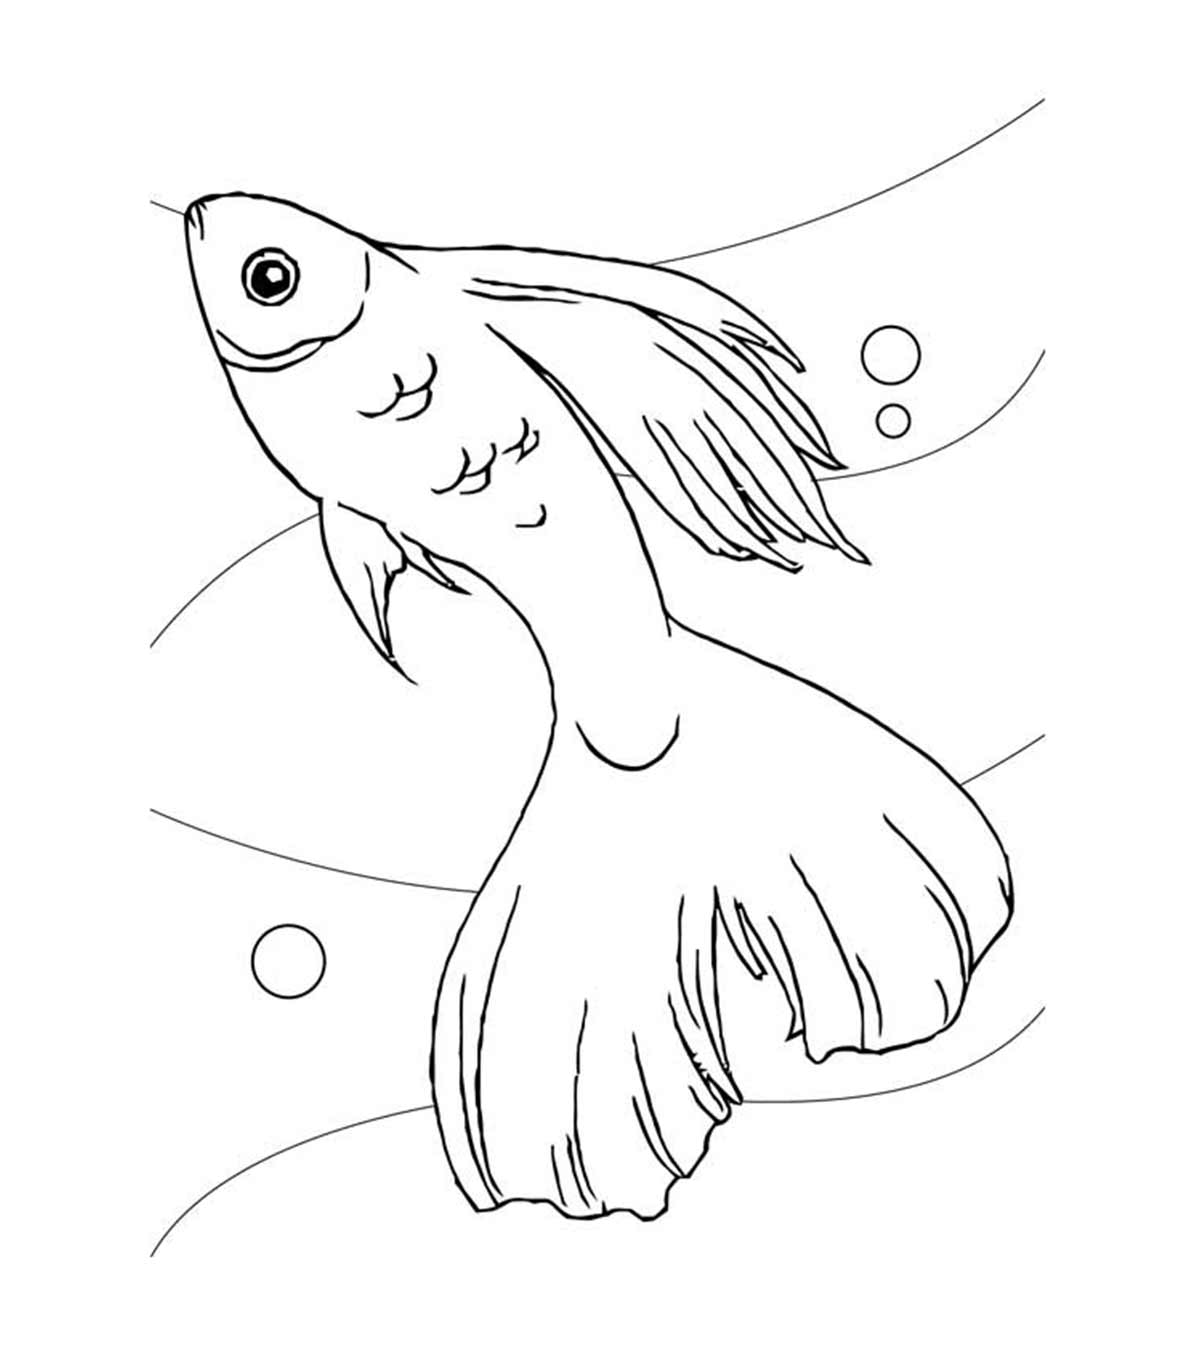 25 Interesting Koi Fish Coloring Pages For Your Toddlers_image